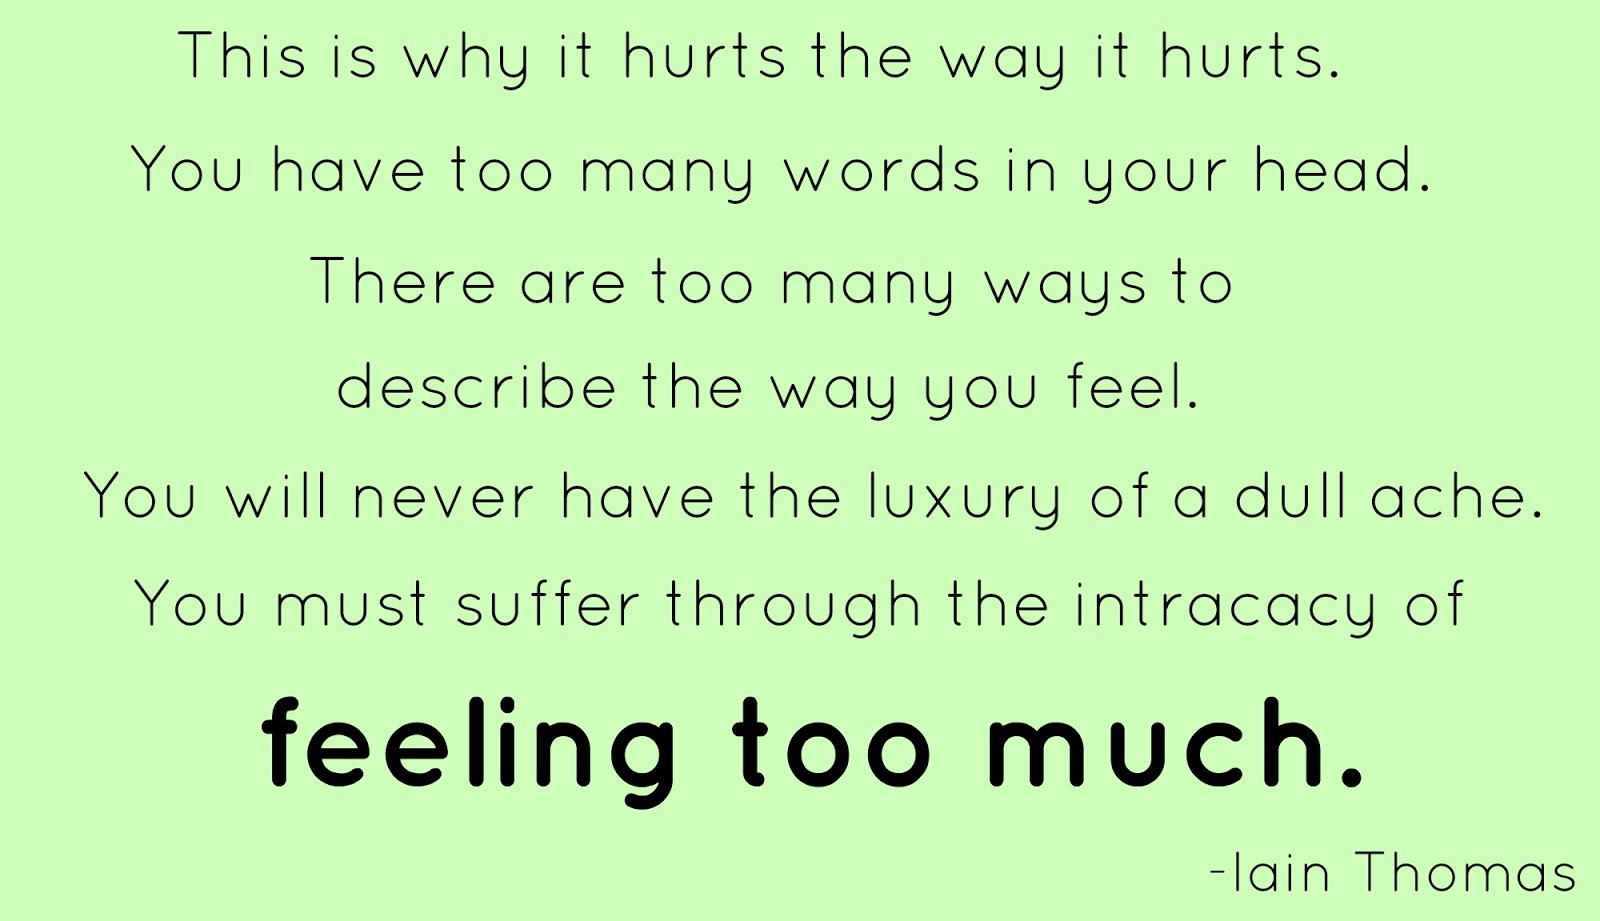 When you hurt i hurt. I Love you so much it hurt. Quotes about feelings. You hurt my feelings. Why hurts.